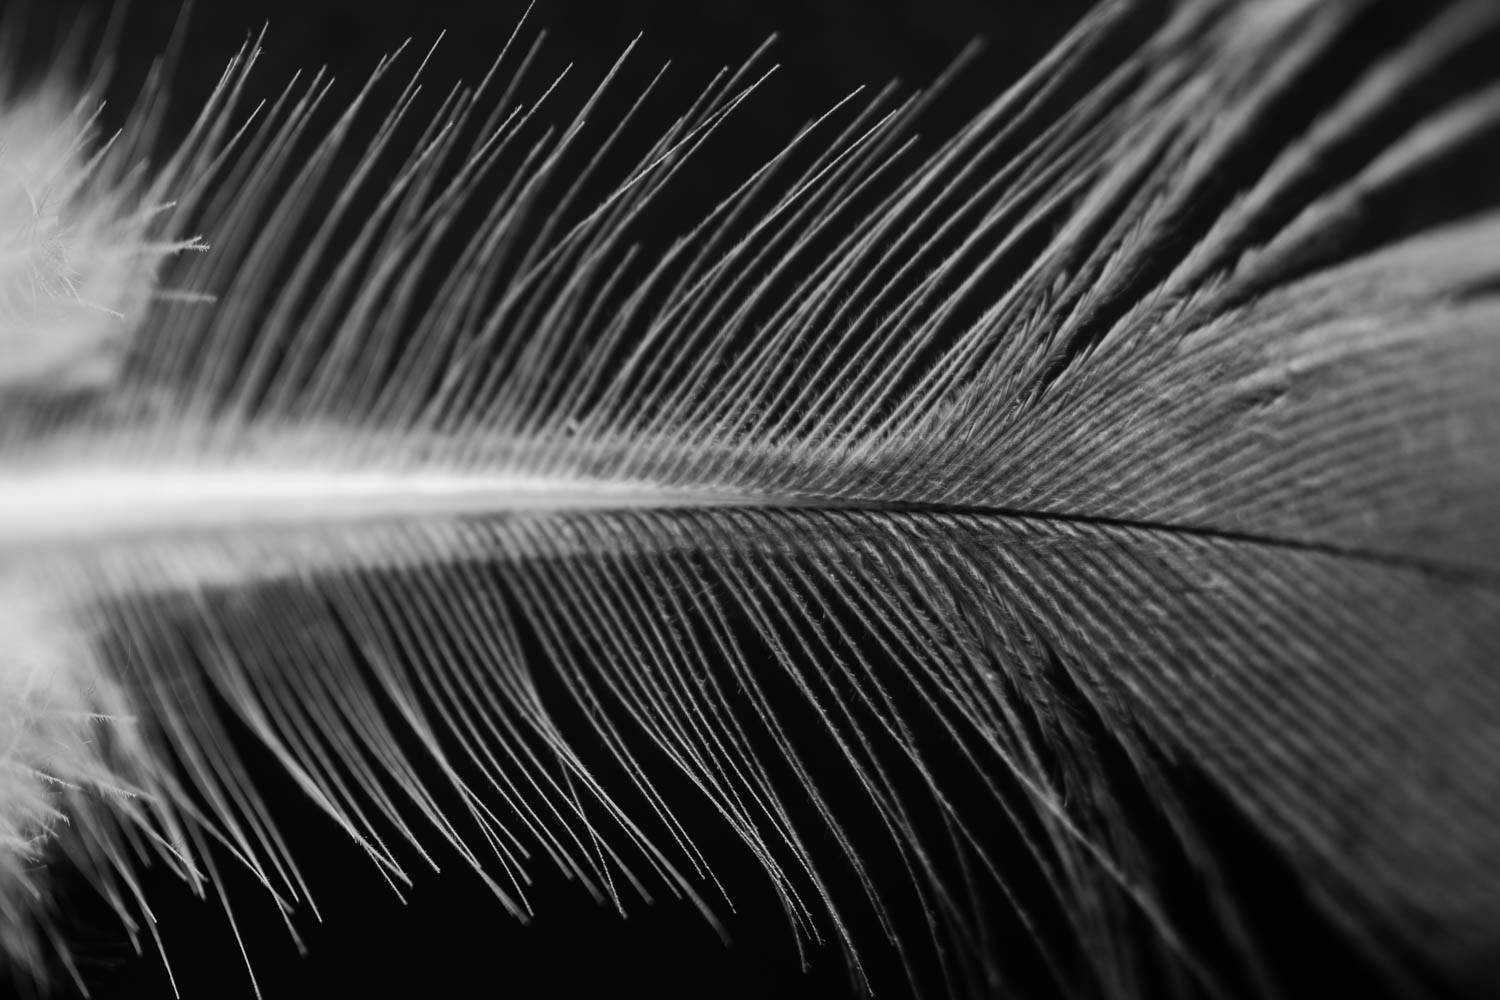 Pigeon feather photographed with a macro lens.